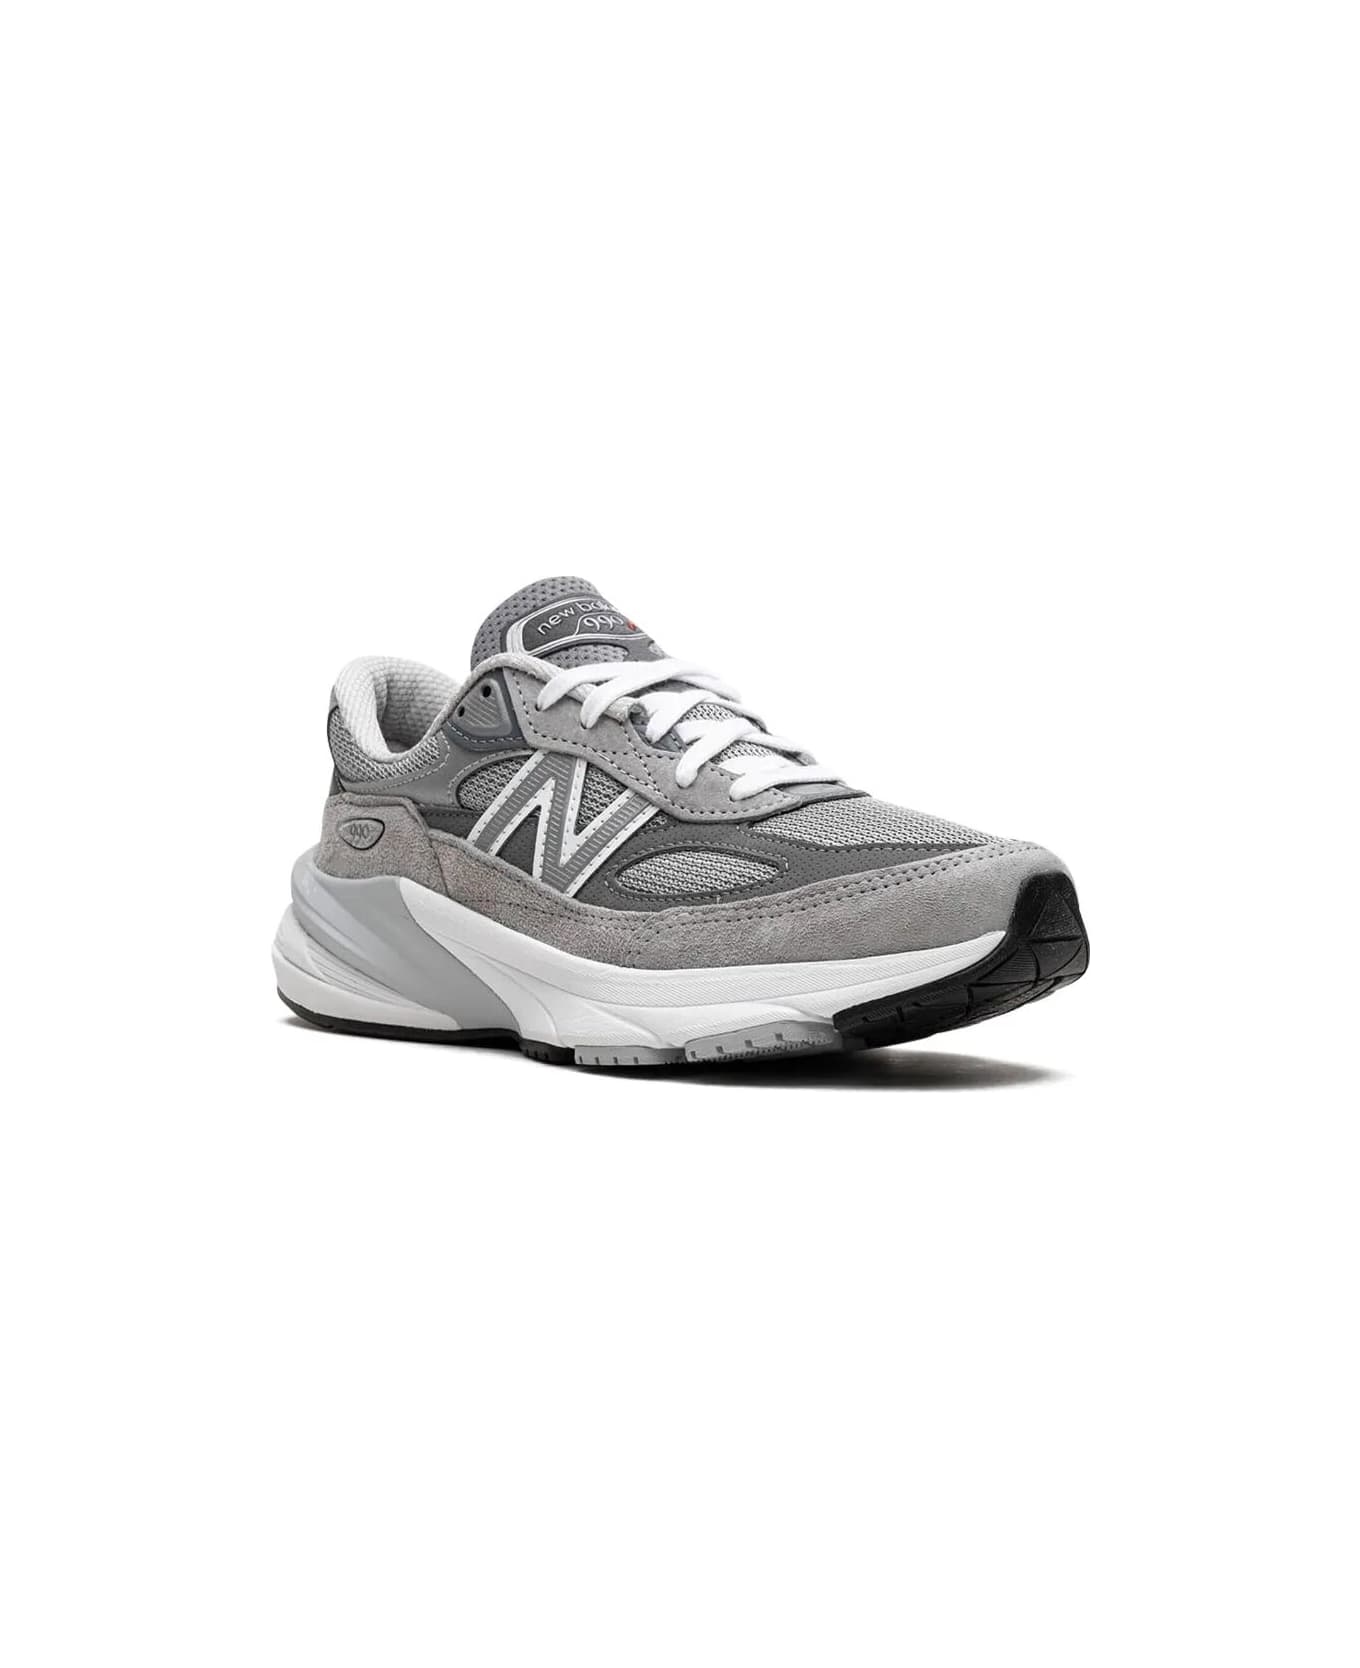 New Balance 990v6 Sneakers - Cool Grey